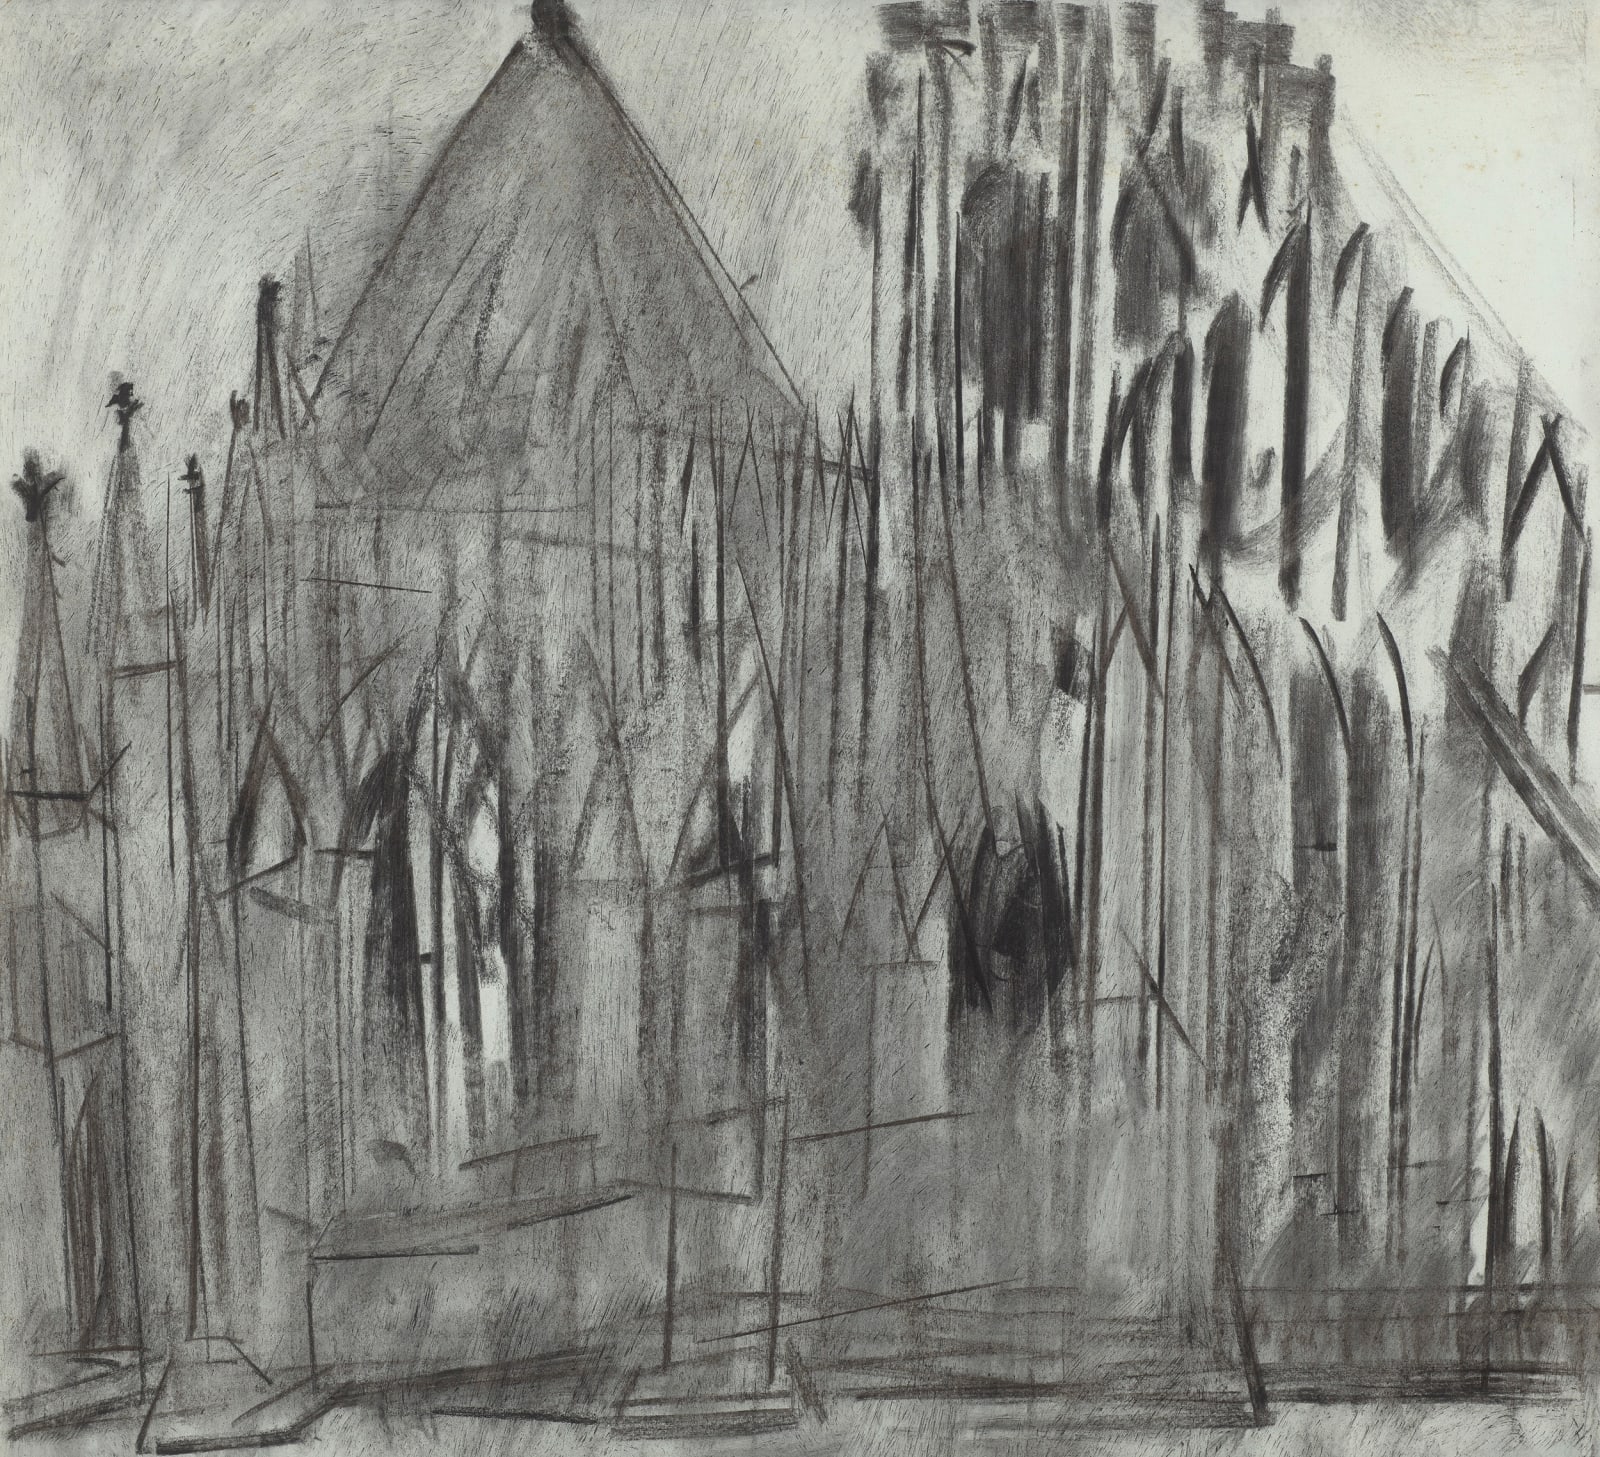 Dennis Creffield, York Cathedral: Central Tower and Chapter House, 1987